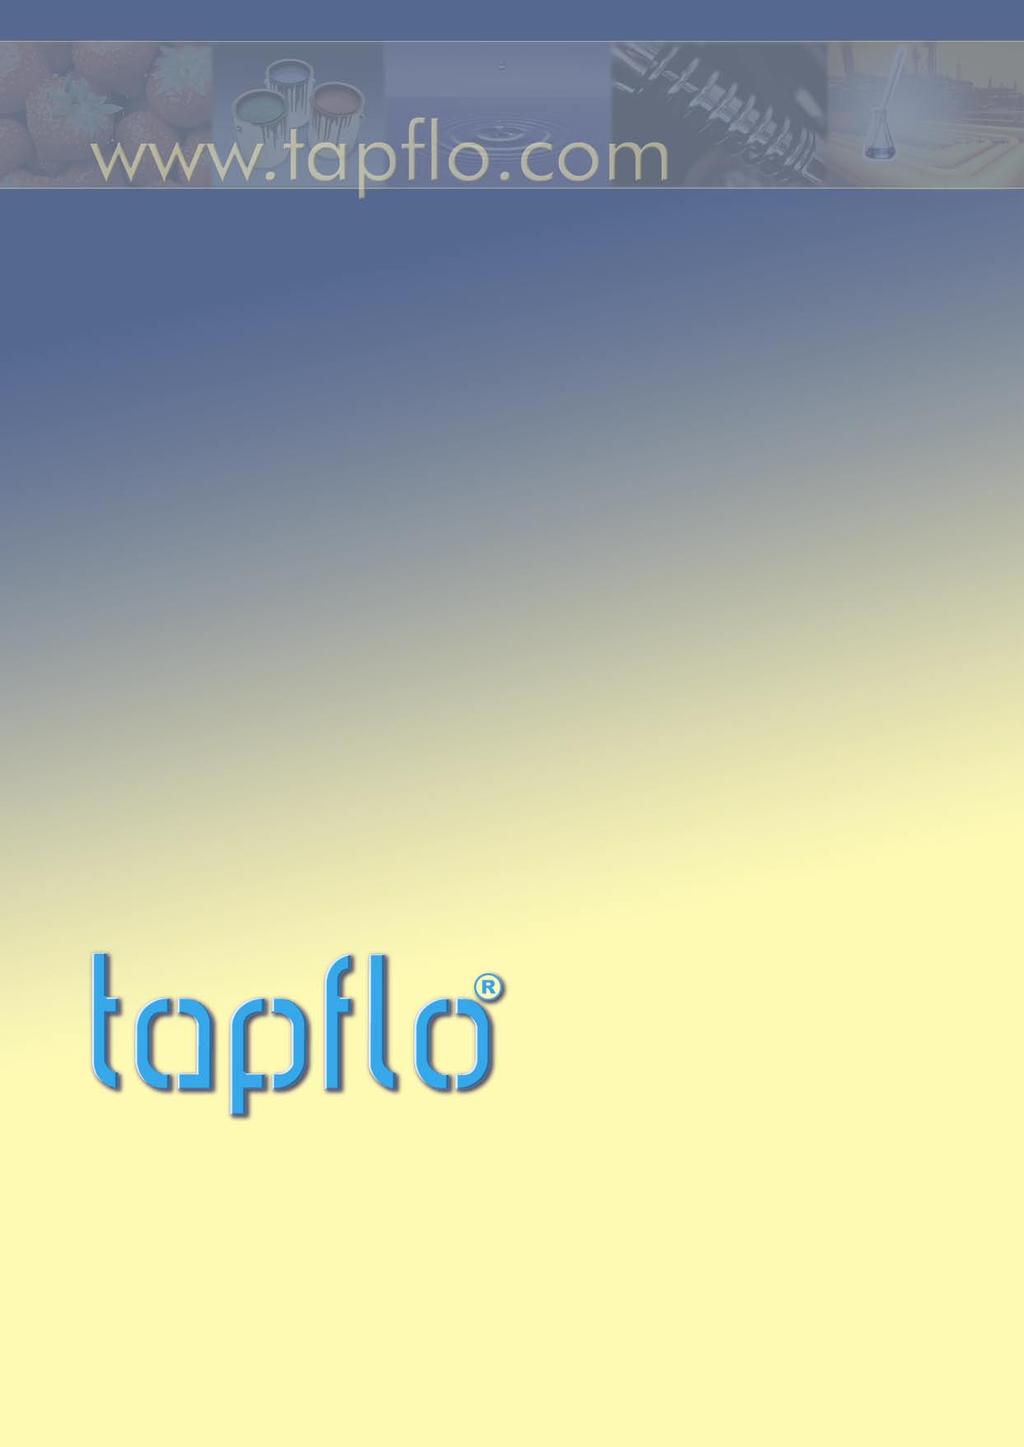 Tapflo is represented in more than 30 countries worldwide. Visit our website for updated information.